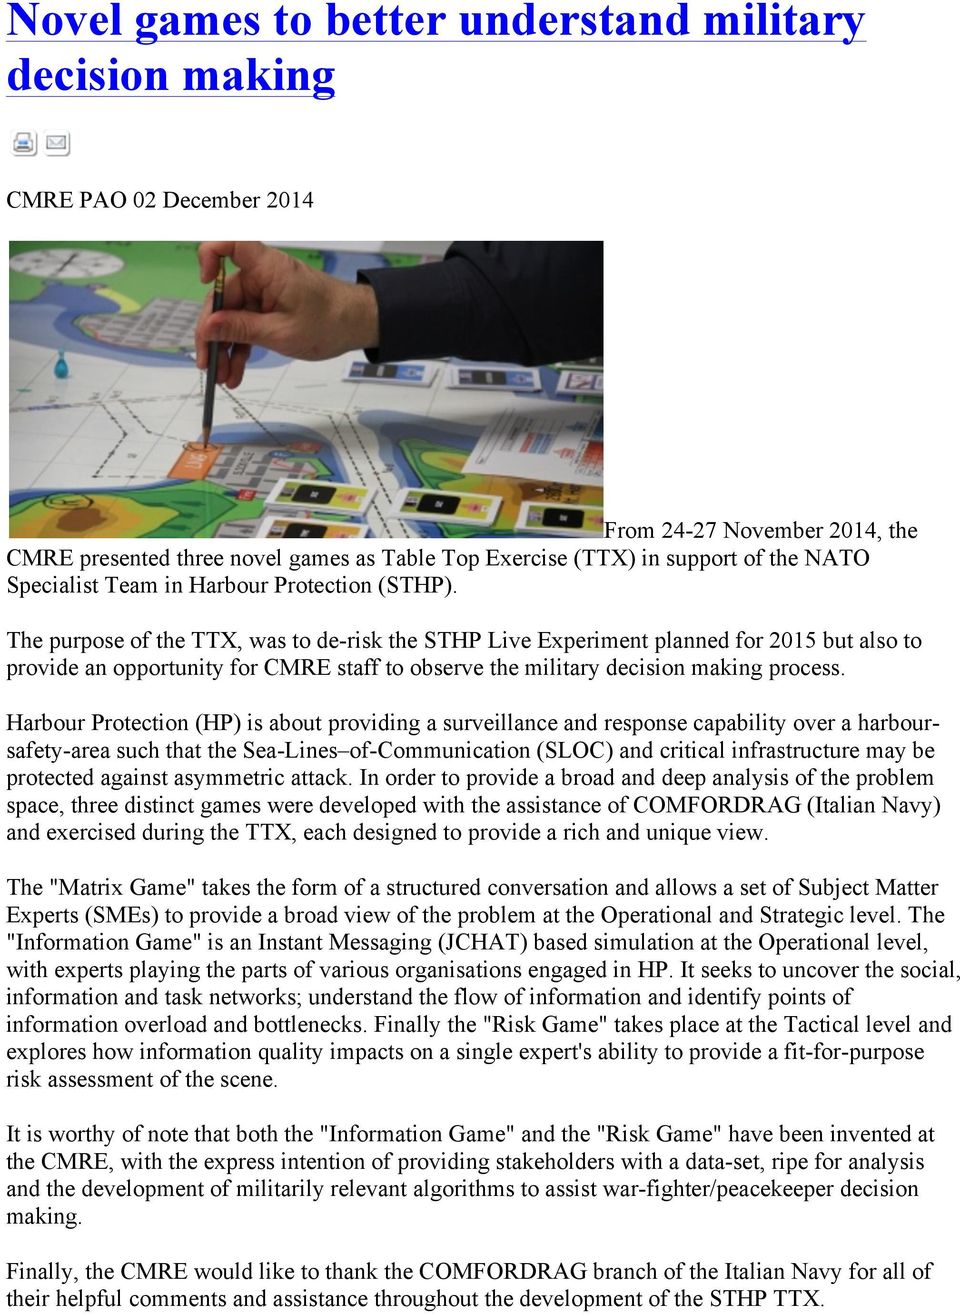 The purpose of the TTX, was to de-risk the STHP Live Experiment planned for 2015 but also to provide an opportunity for CMRE staff to observe the military decision making process.